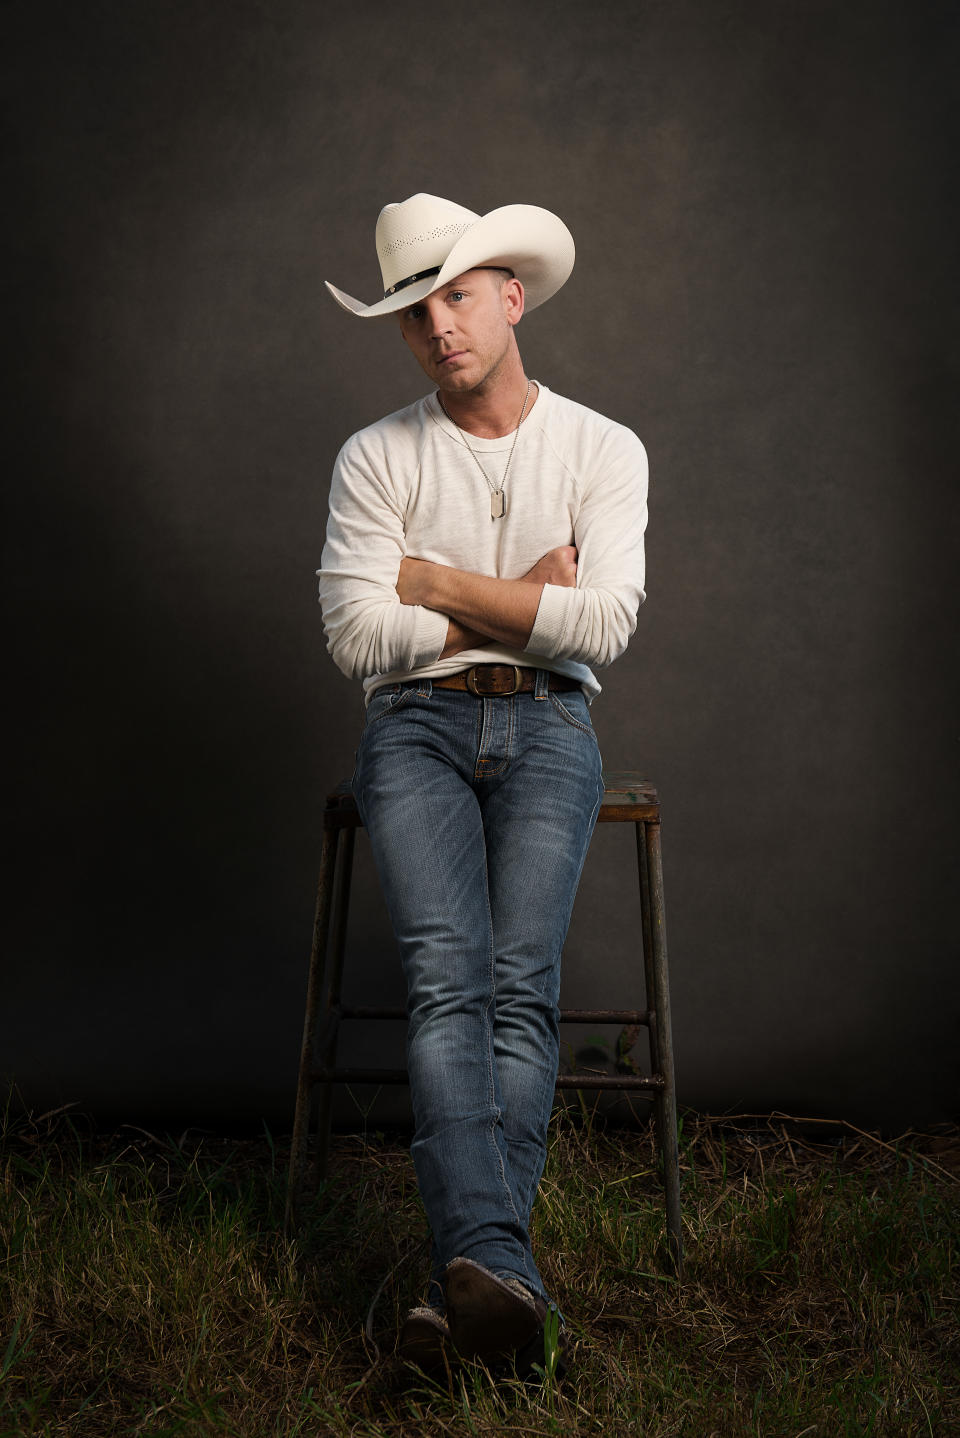 PEOPLE can exclusively reveal country star Justin Moore's newest music video